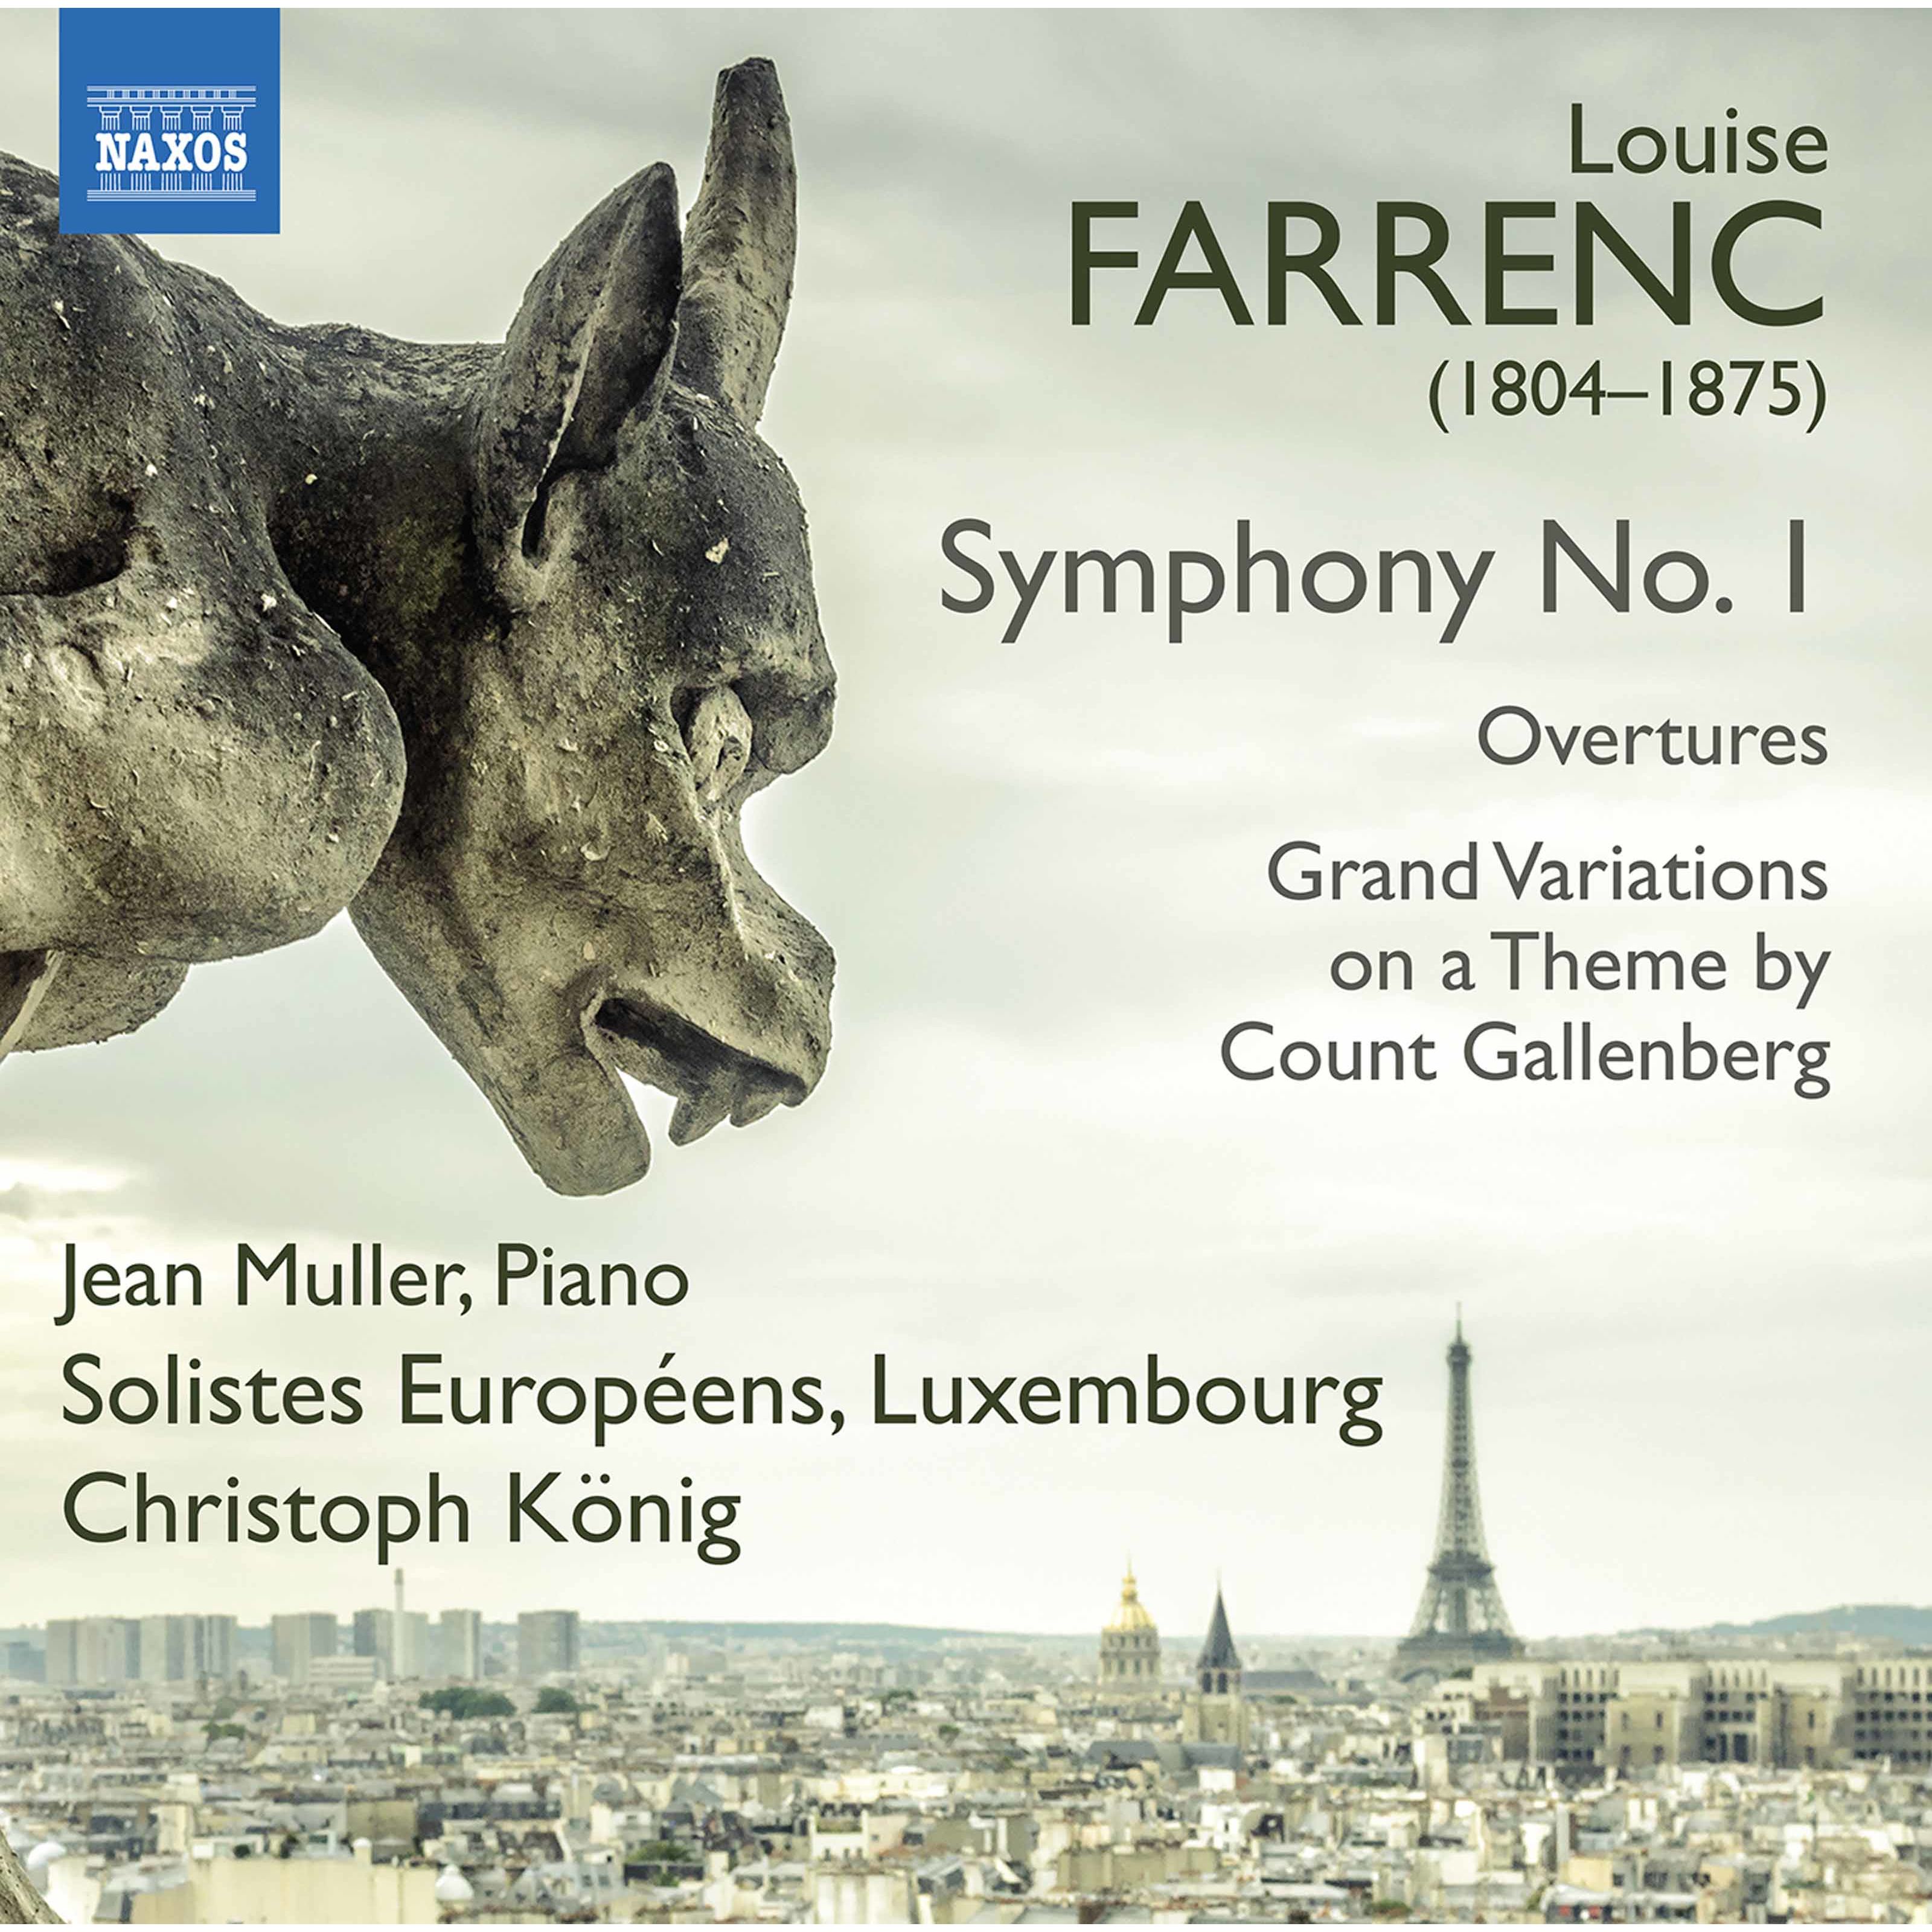 Jean Muller, Solistes Europeens, Luxembourg & Christoph König - Farrenc: Orchestral Works (2020) [FLAC 24bit/96kHz]